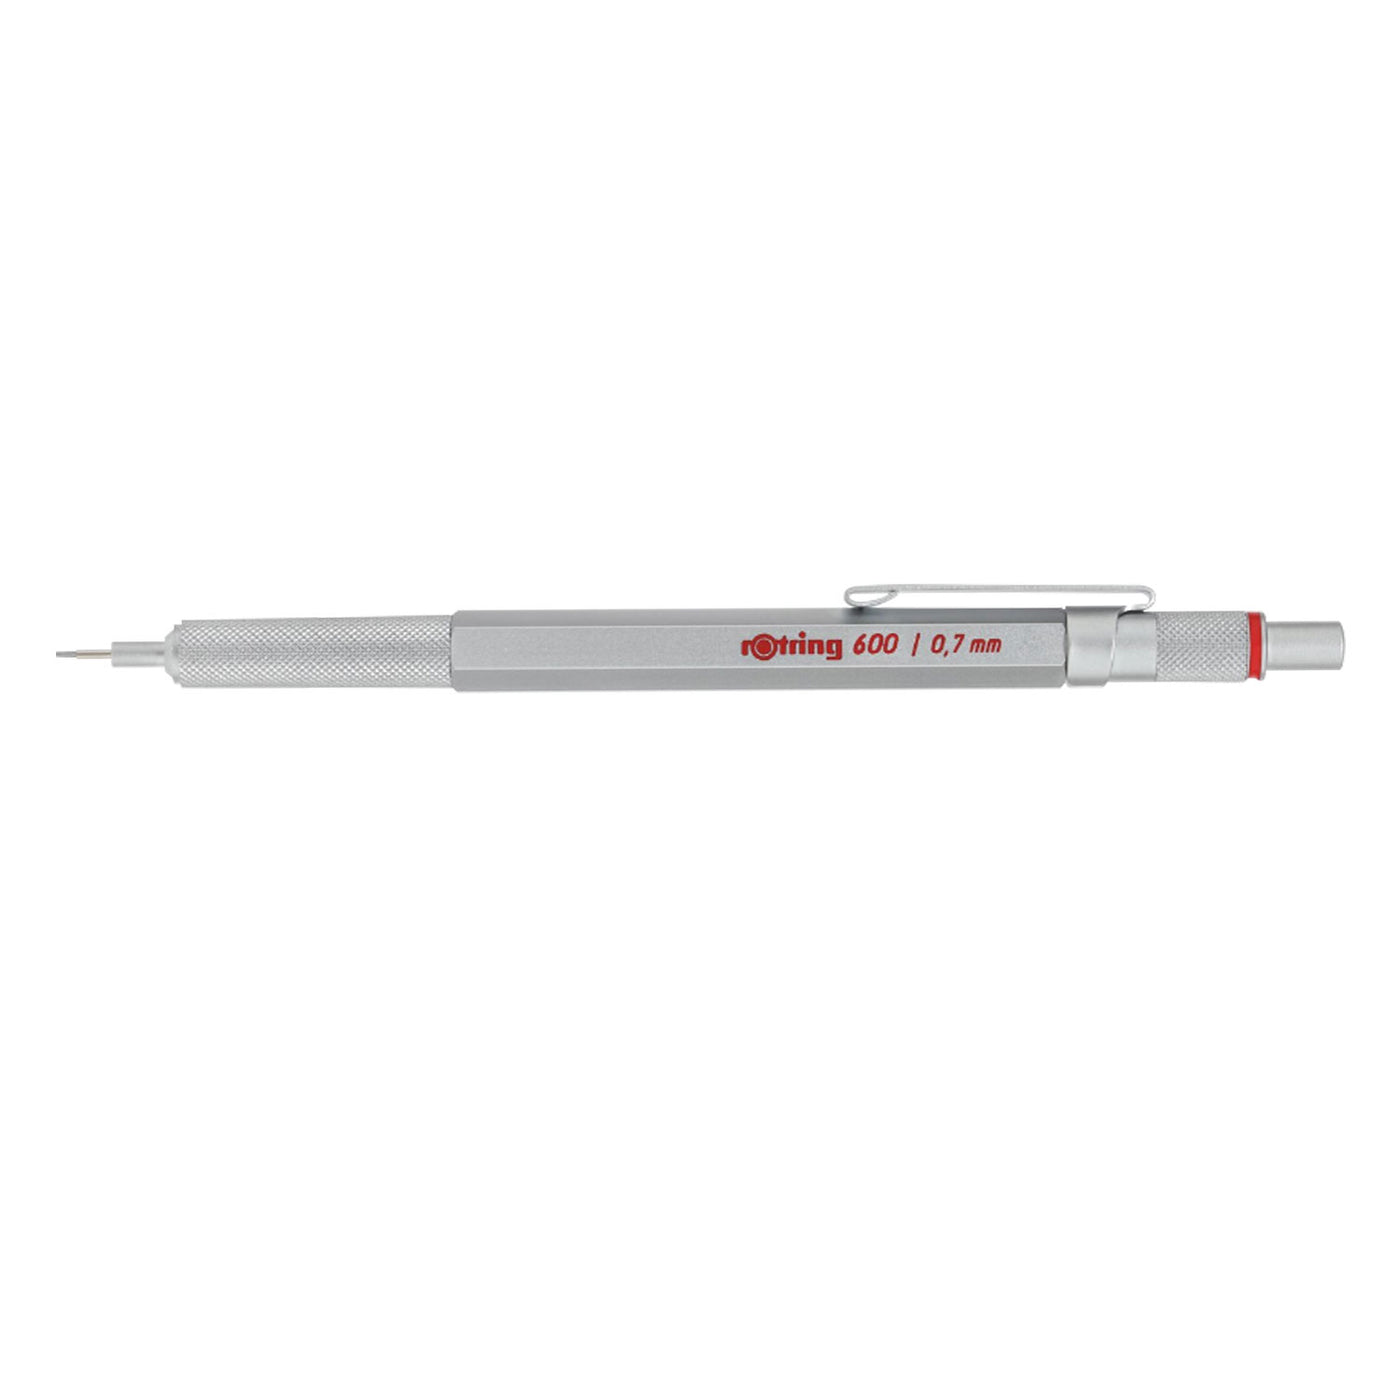 Rotring 600 0.7mm Mechanical Pencil - Silver 3